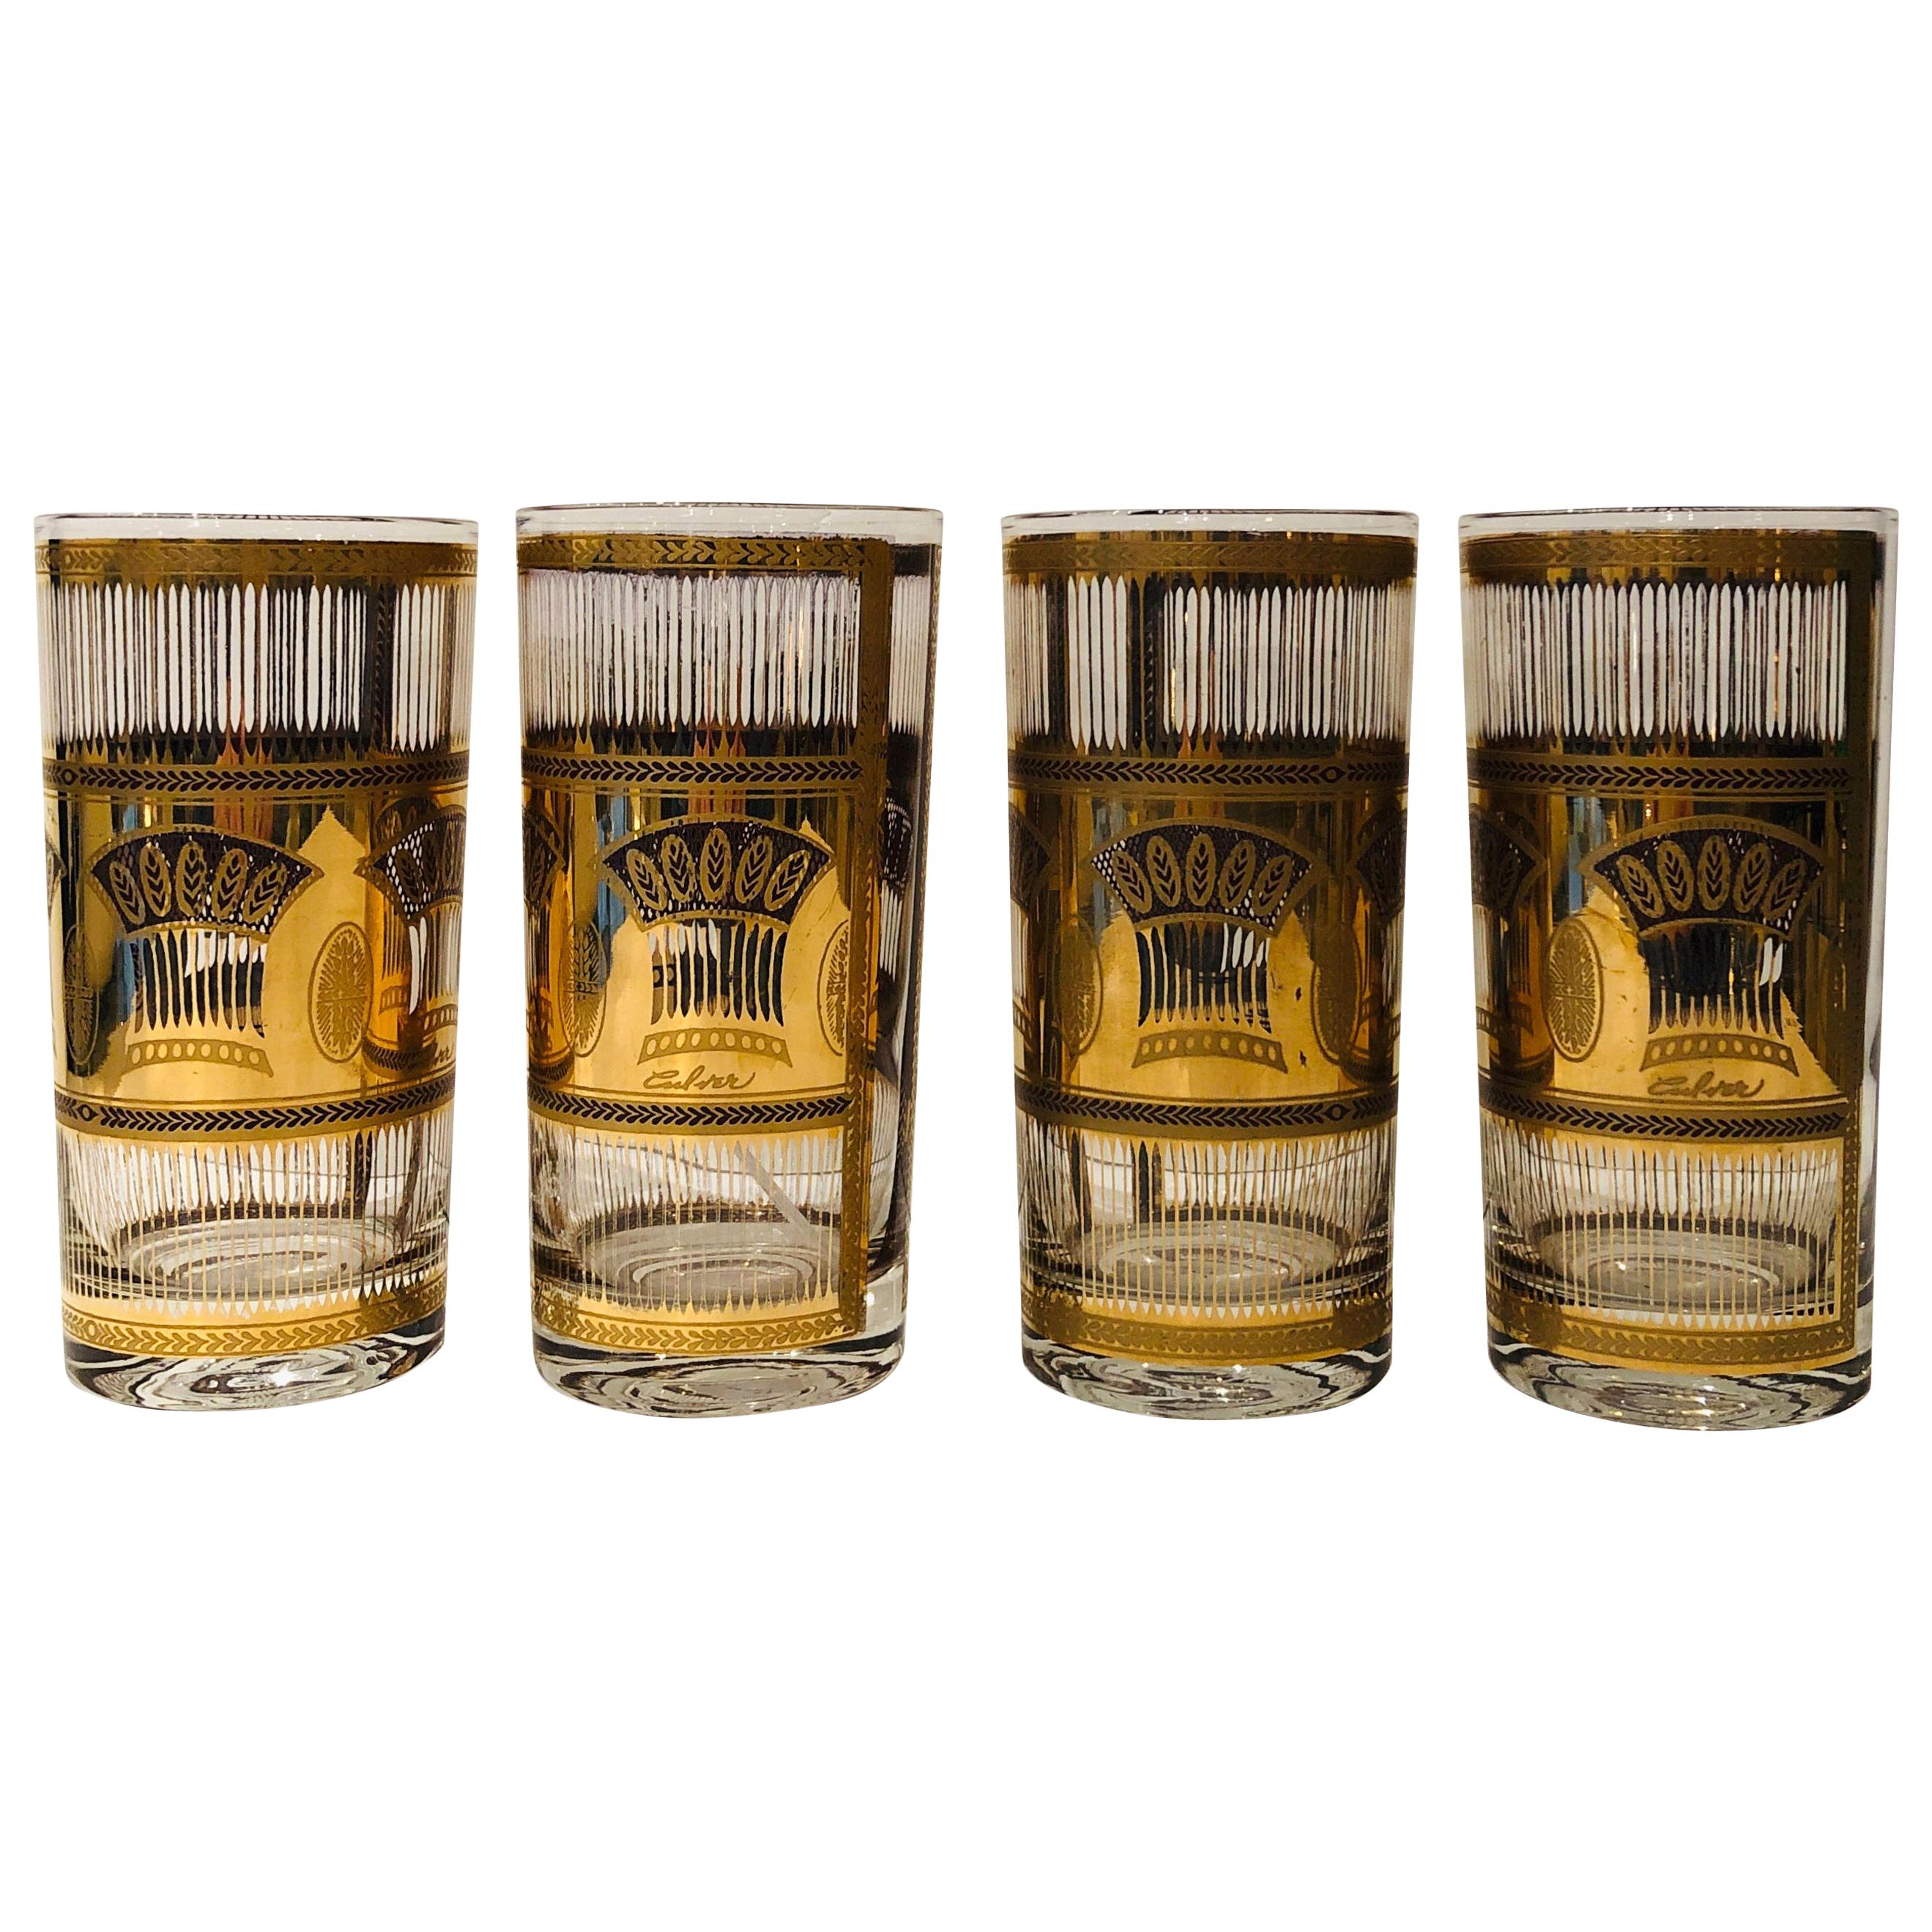 Set of 4 Culver Gold Gilt over Glass Wheat Sheath Theme Tall Cocktail Glasses